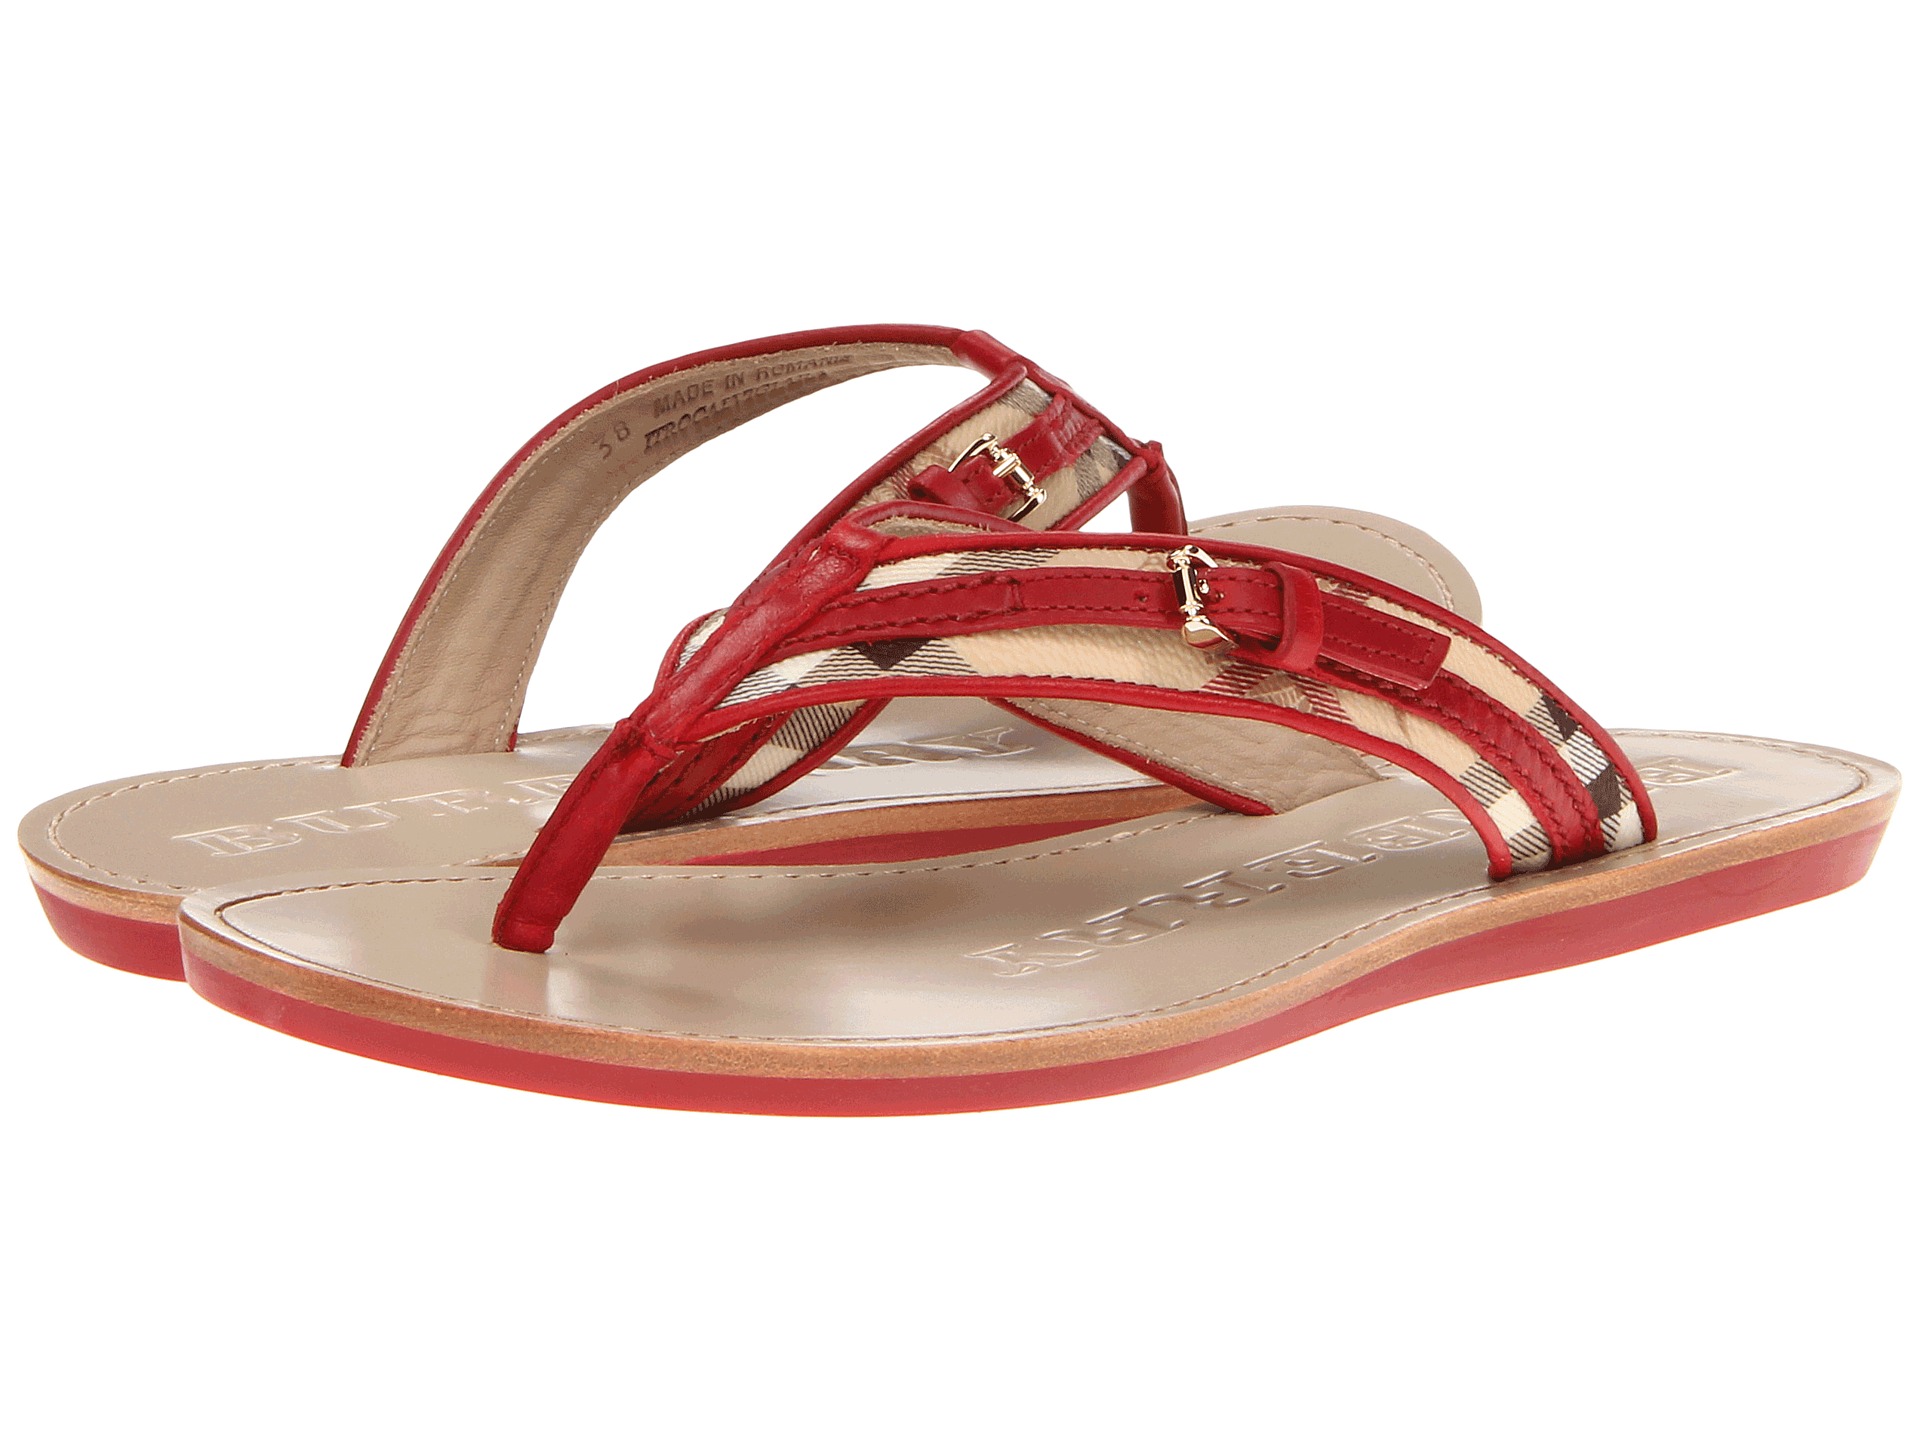   225.00 NEW Burberry Check Buckle Detail Flip Flops $225.00 NEW